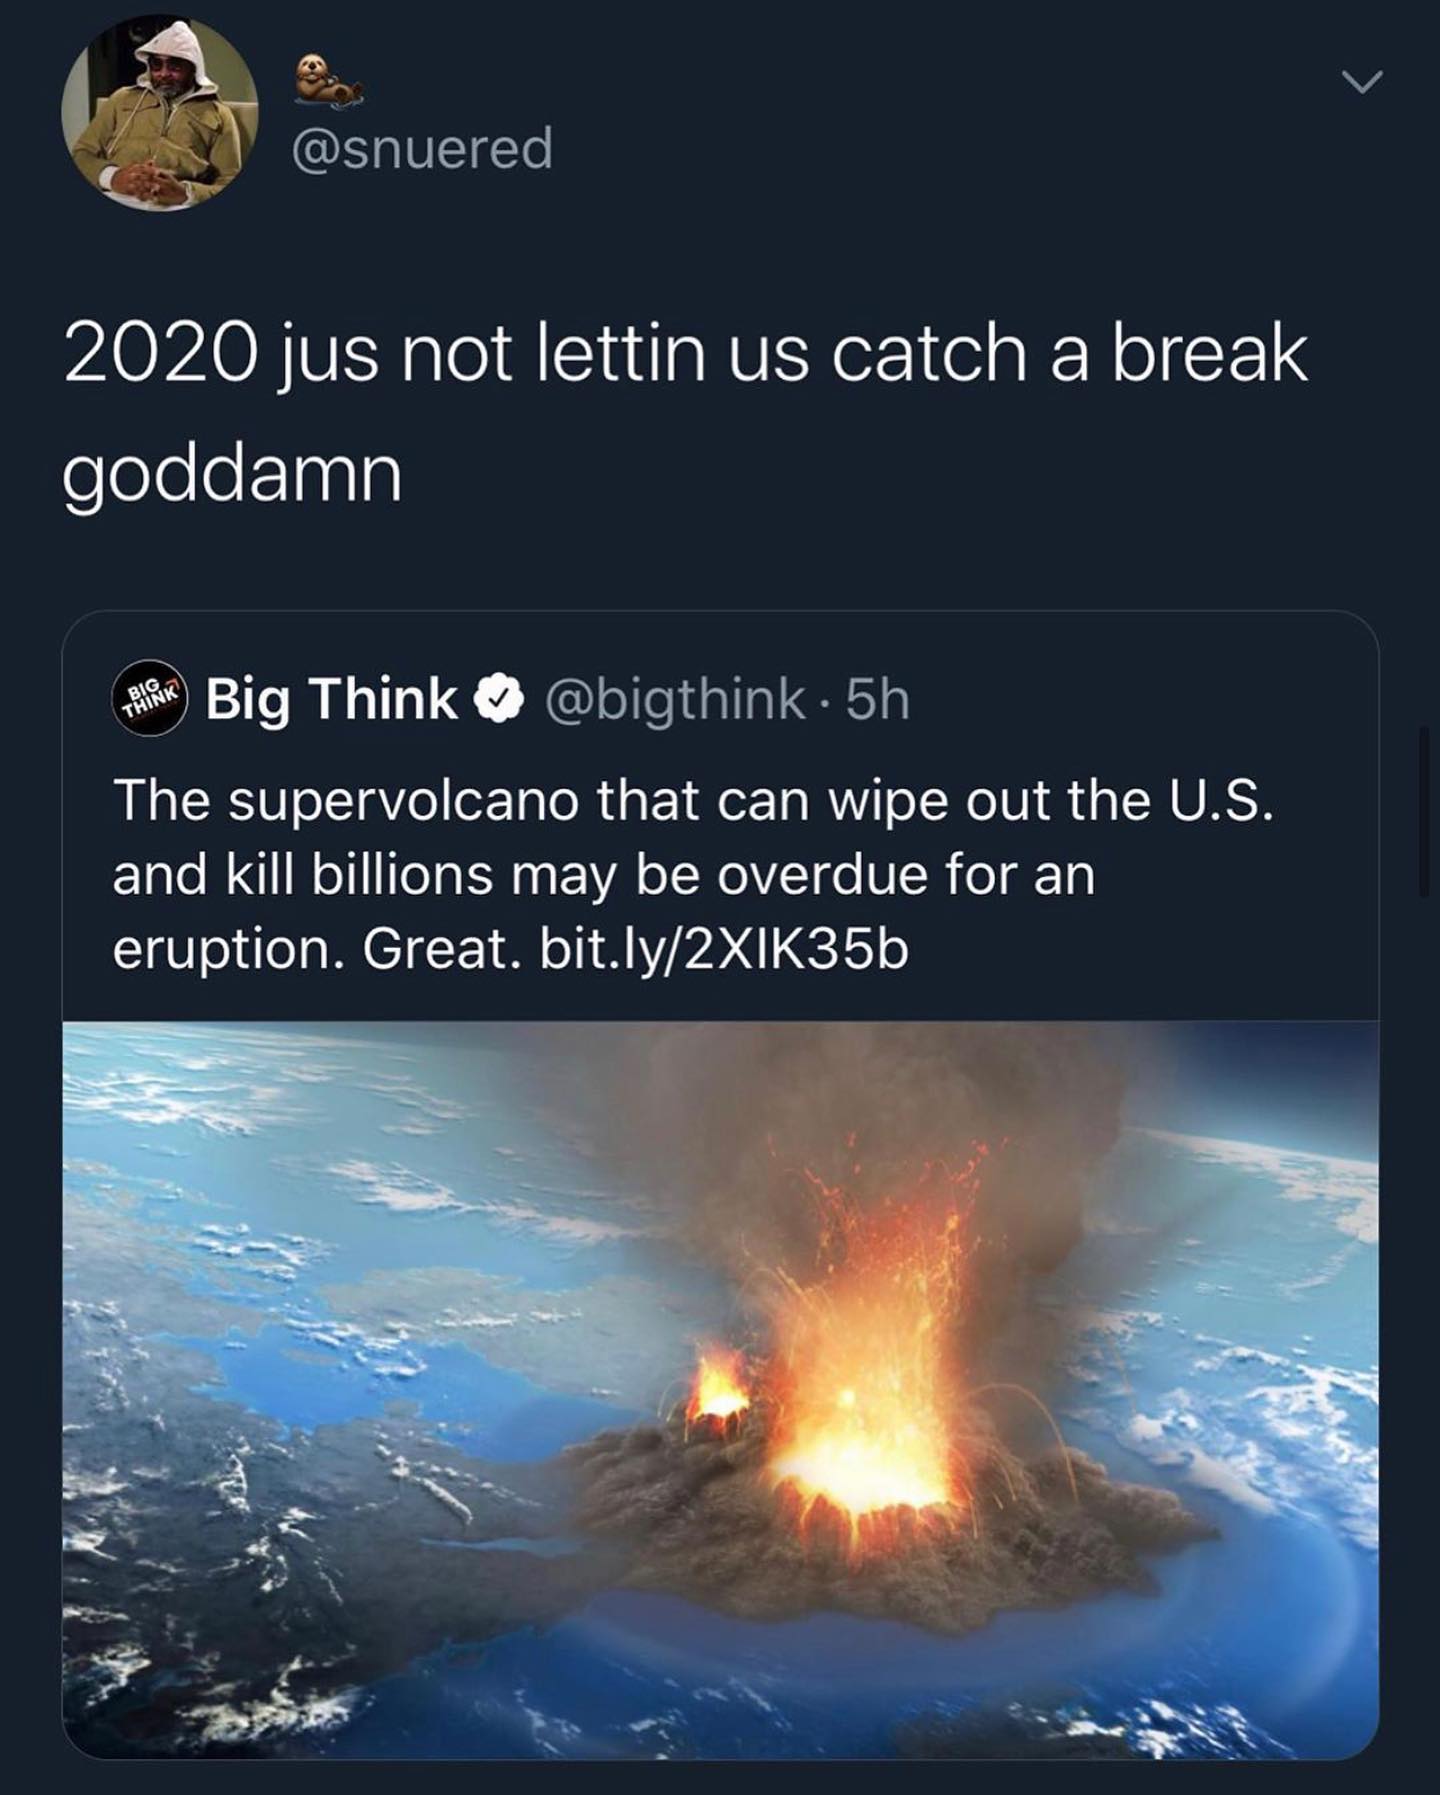 heat - 2020 jus not lettin us catch a break goddamn Big Think Big Think 5h The supervolcano that can wipe out the U.S. and kill billions may be overdue for an eruption. Great. bit.ly2XIK35b